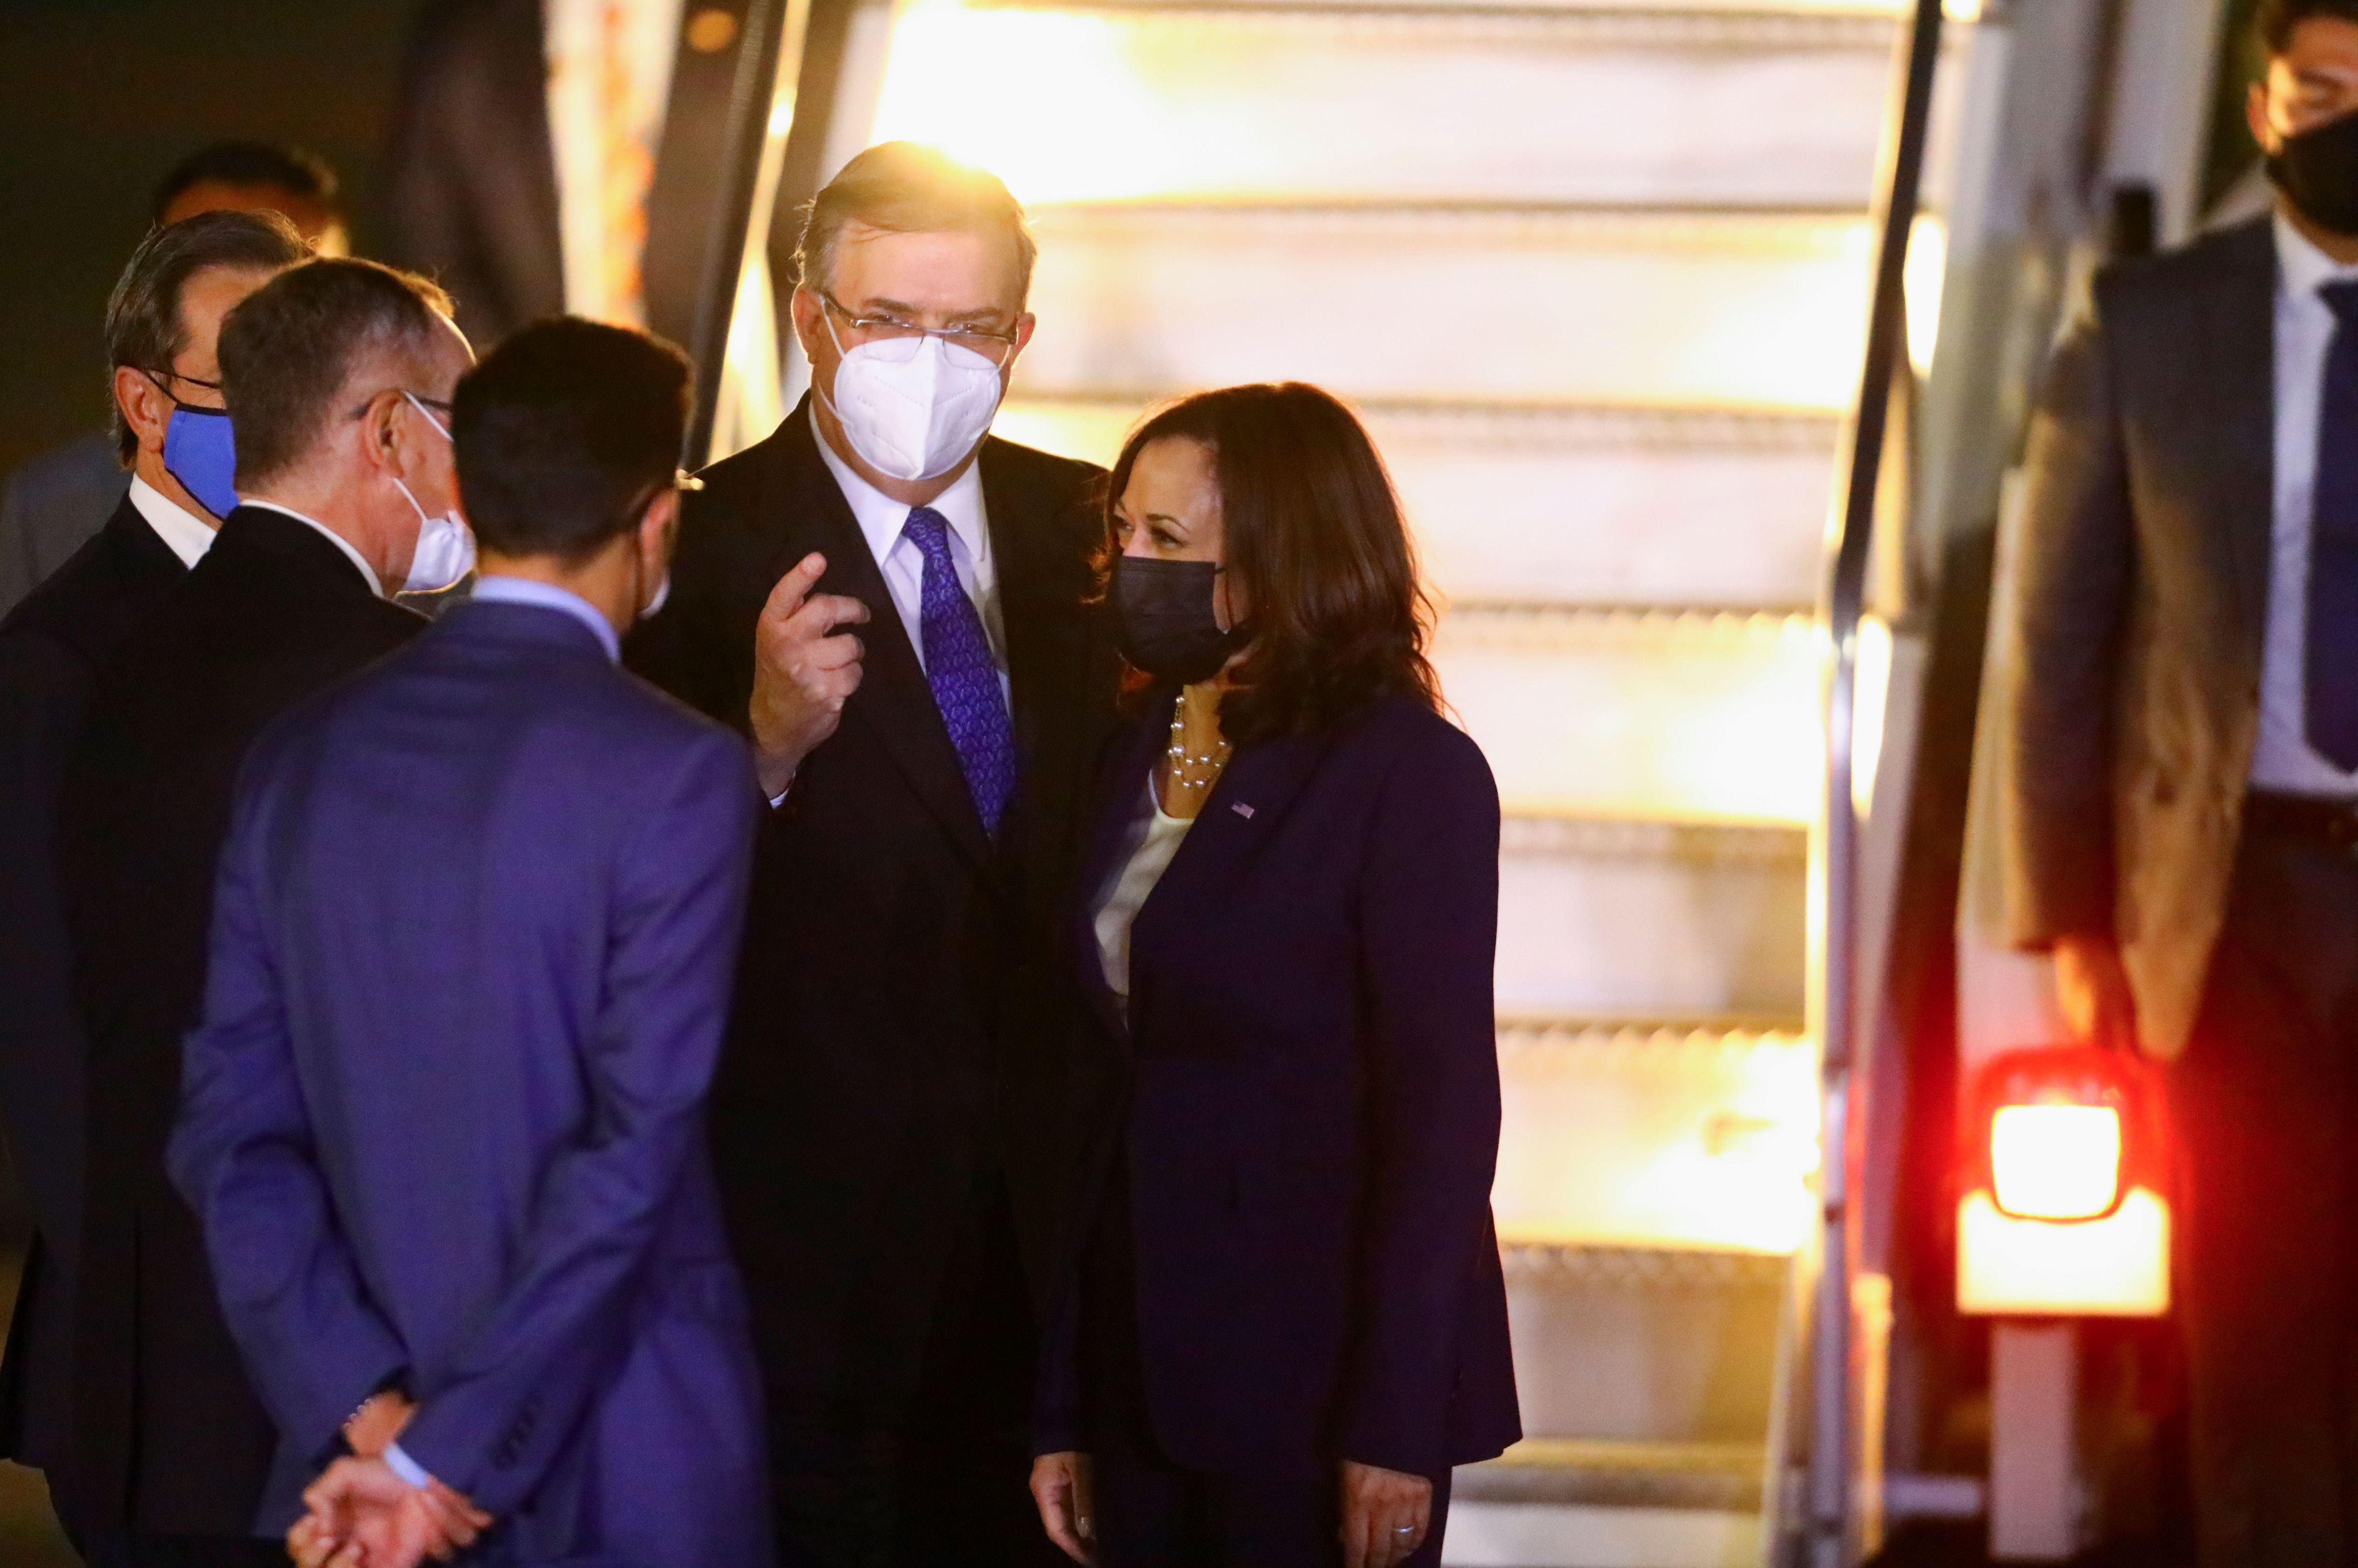 U.S. Vice President Kamala Harris is greeted by Mexican Foreign Minister Marcelo Ebrard as she steps off the plane upon arrival at Benito Juarez International airport in Mexico City, for her first international trip as Vice President to Guatemala and Mexico, in Mexico June 7, 2021. REUTERS/Edgard Garrido